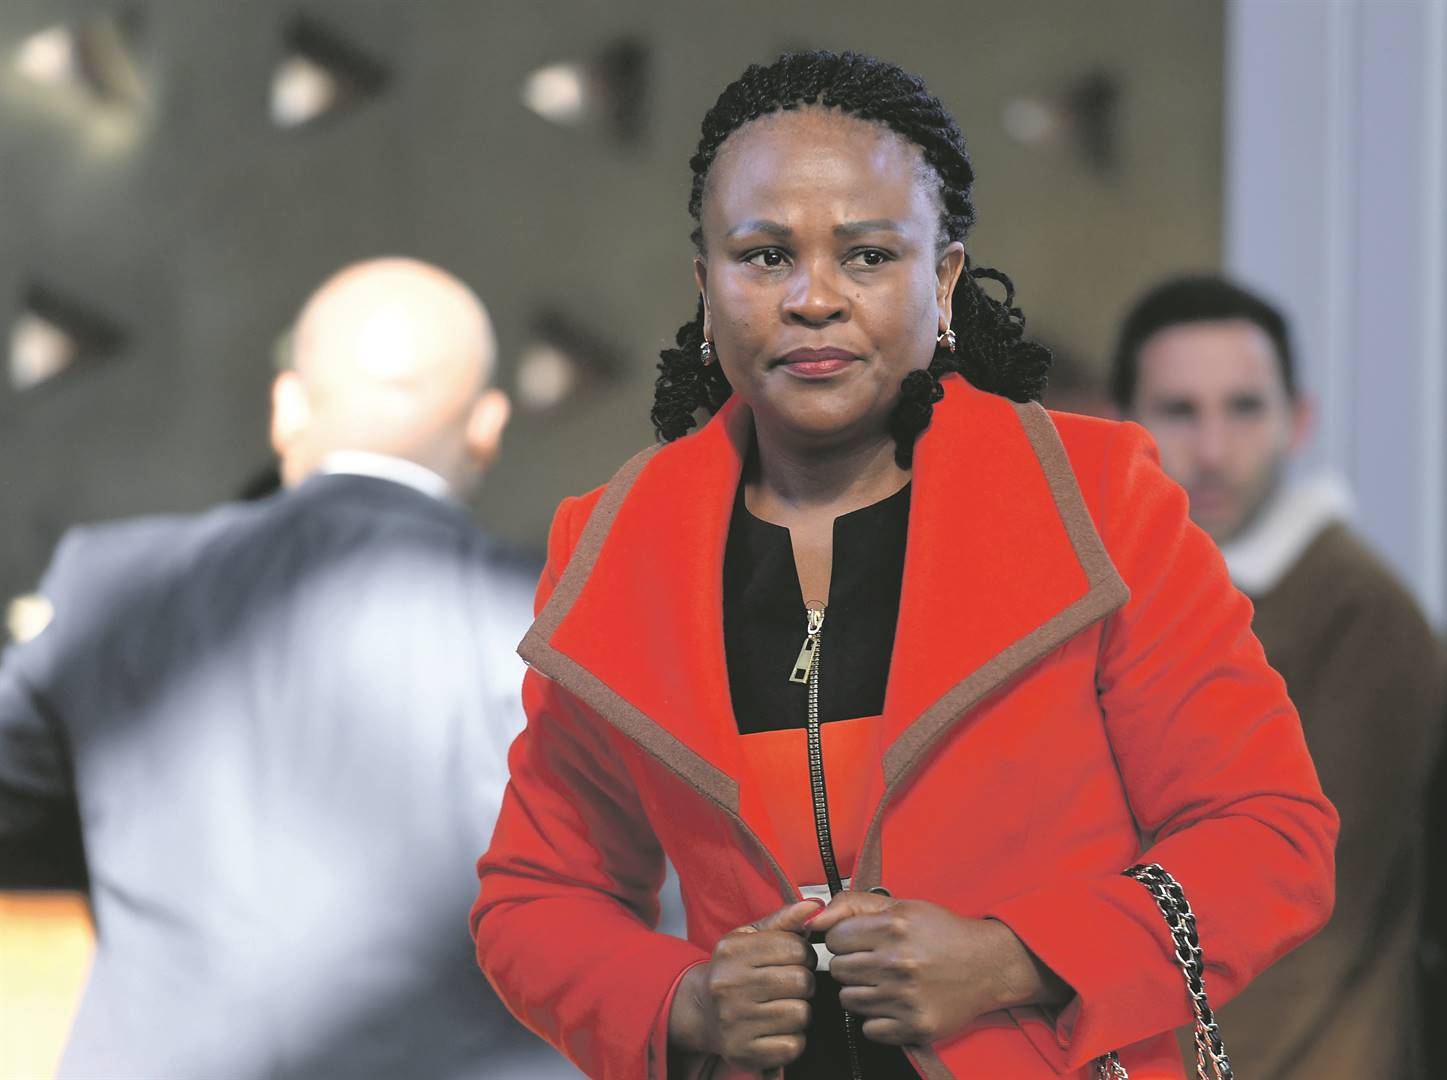 The Constitutional Court has dismissed an application for leave to appeal the case involving Public Enterprises Minister Pravin Gordhan and the SA Revenue Service “rogue unit” report. Picture: Felix Dlangamandla